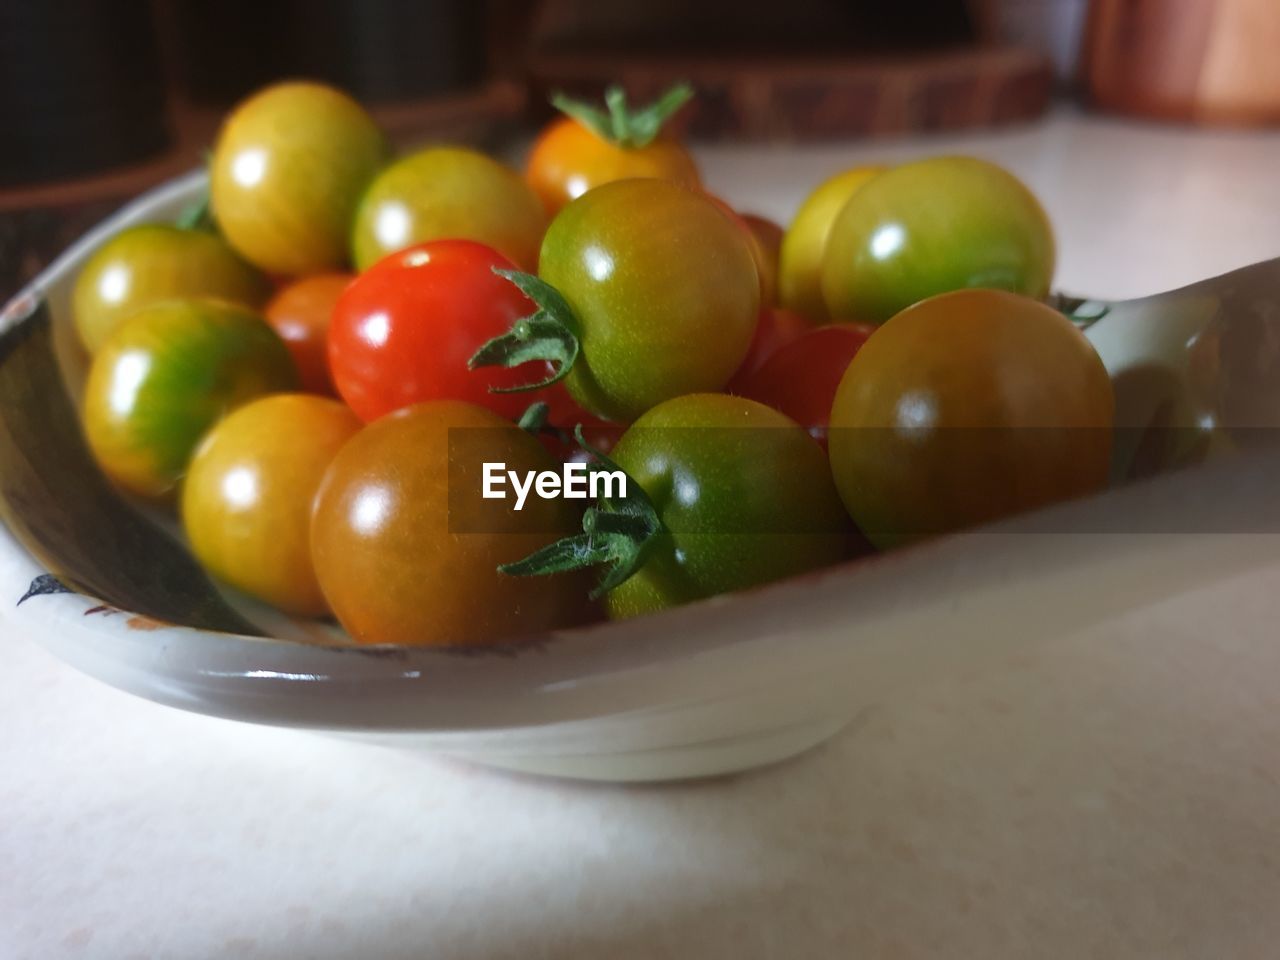 CLOSE-UP OF TOMATOES IN BOWL